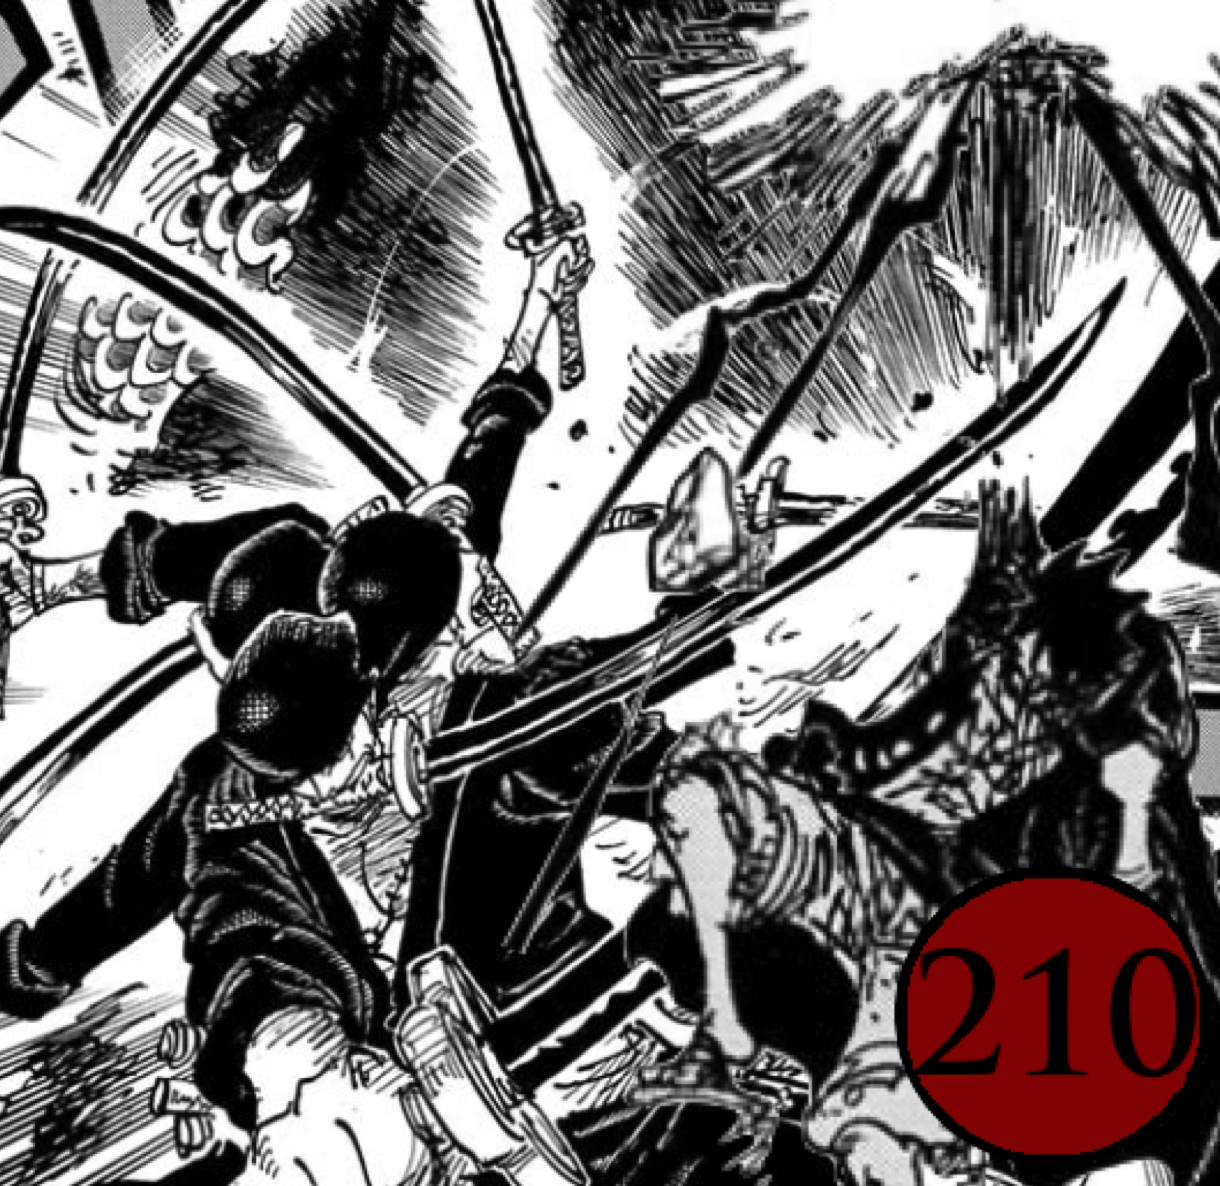 Chapter Secrets Chapter 1010 In Depth Analysis The Library Of Ohara